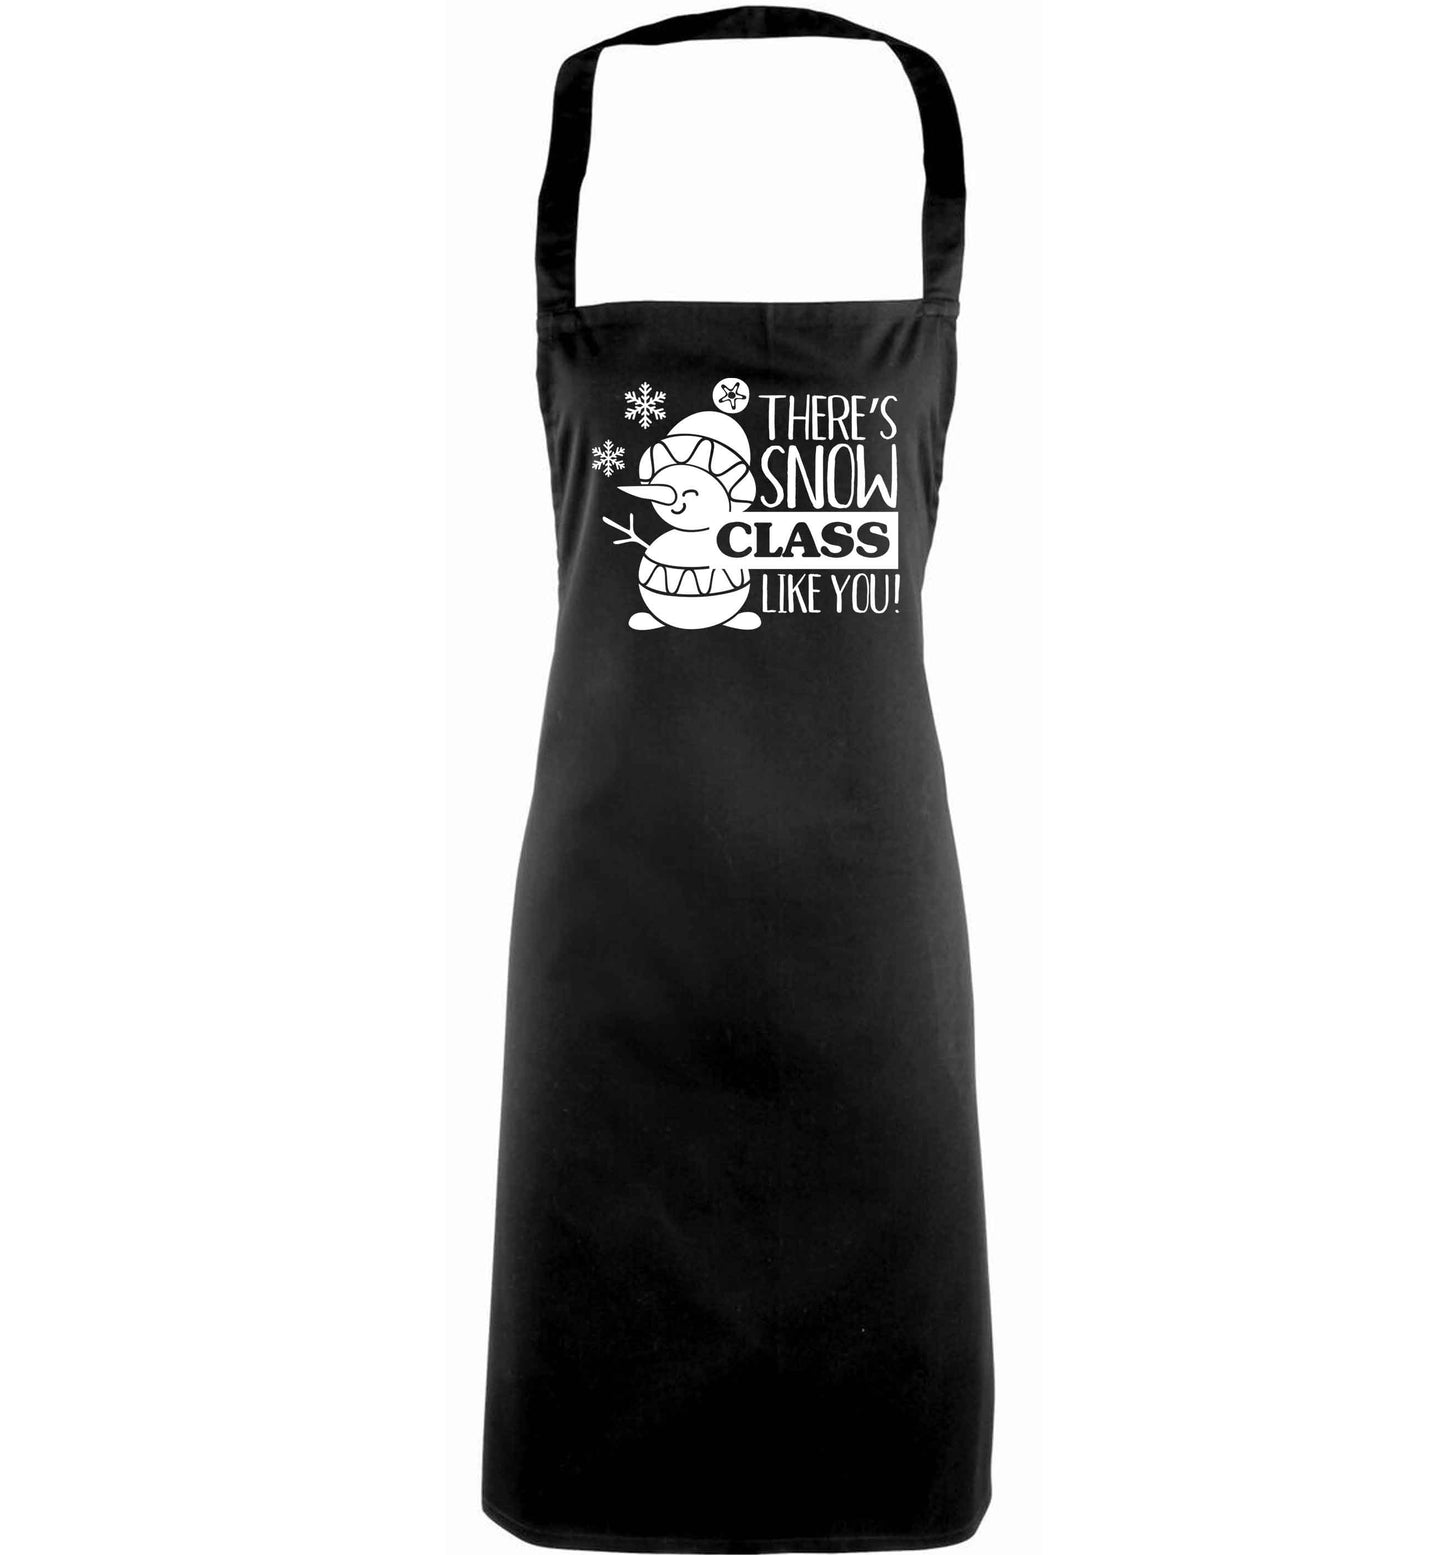 There's snow class like you adults black apron